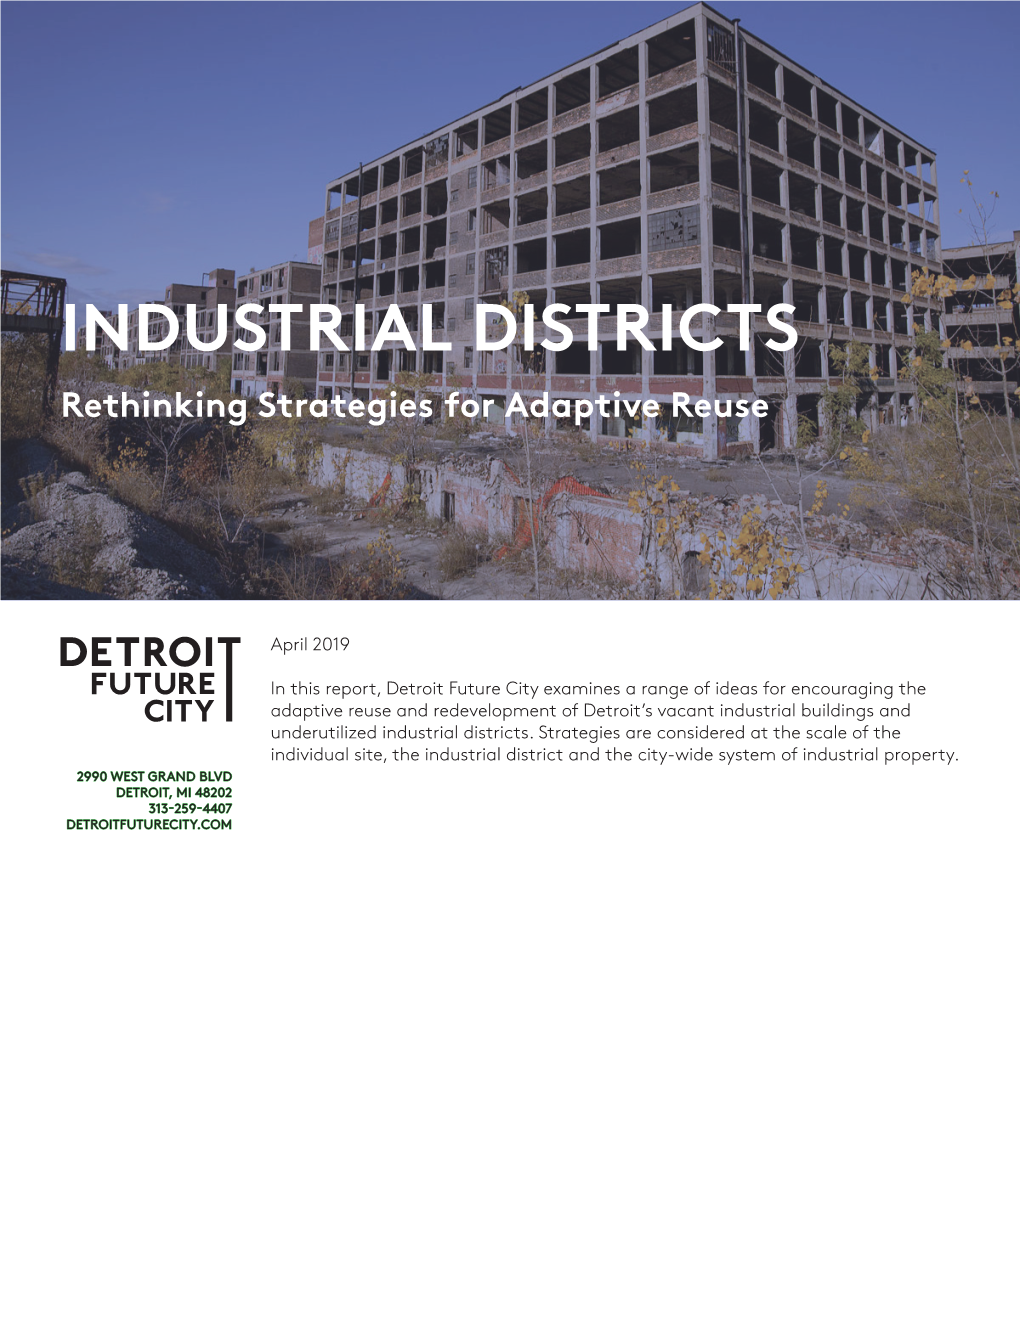 Industrial Districts: Rethinking Strategies for Adaptive Reuse